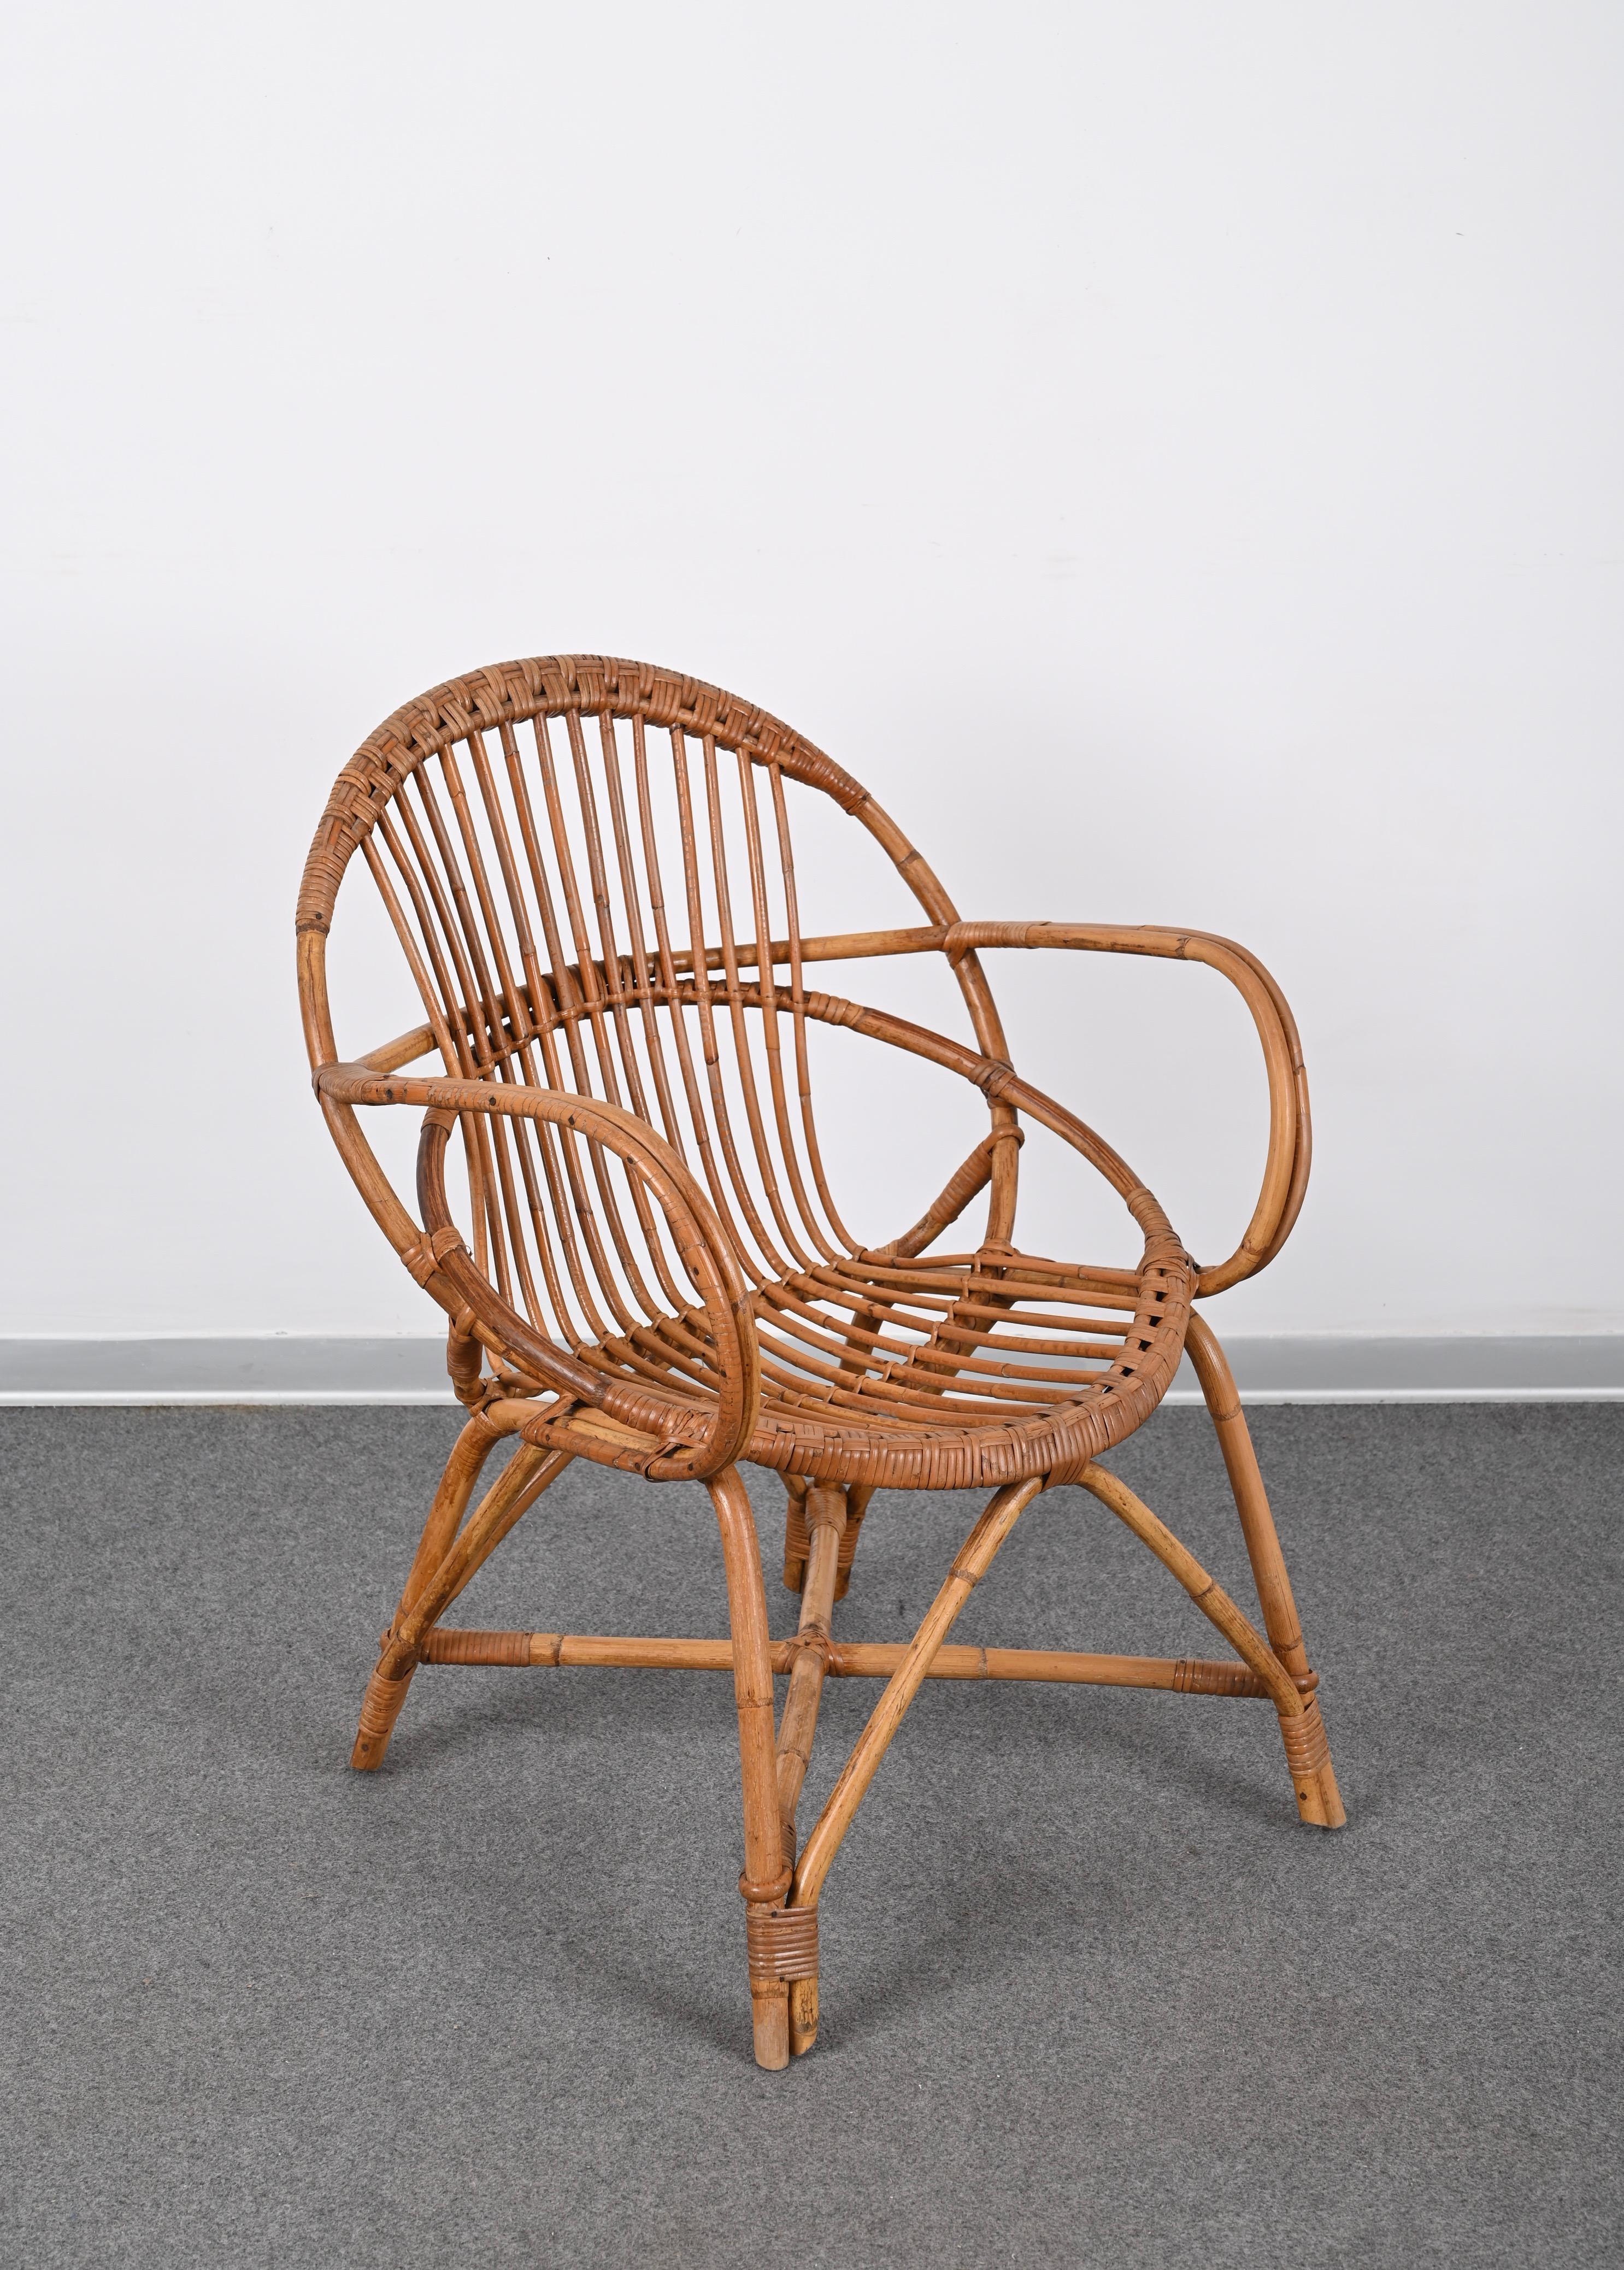 Amazing midcentury Rattan shell armchair. This piece was produced in Italy in the 1950s and is attributed to the mastery of Franco Albini.

The uniqueness of this armchair is due to the solid shell shape of the handmade rattan seat that will